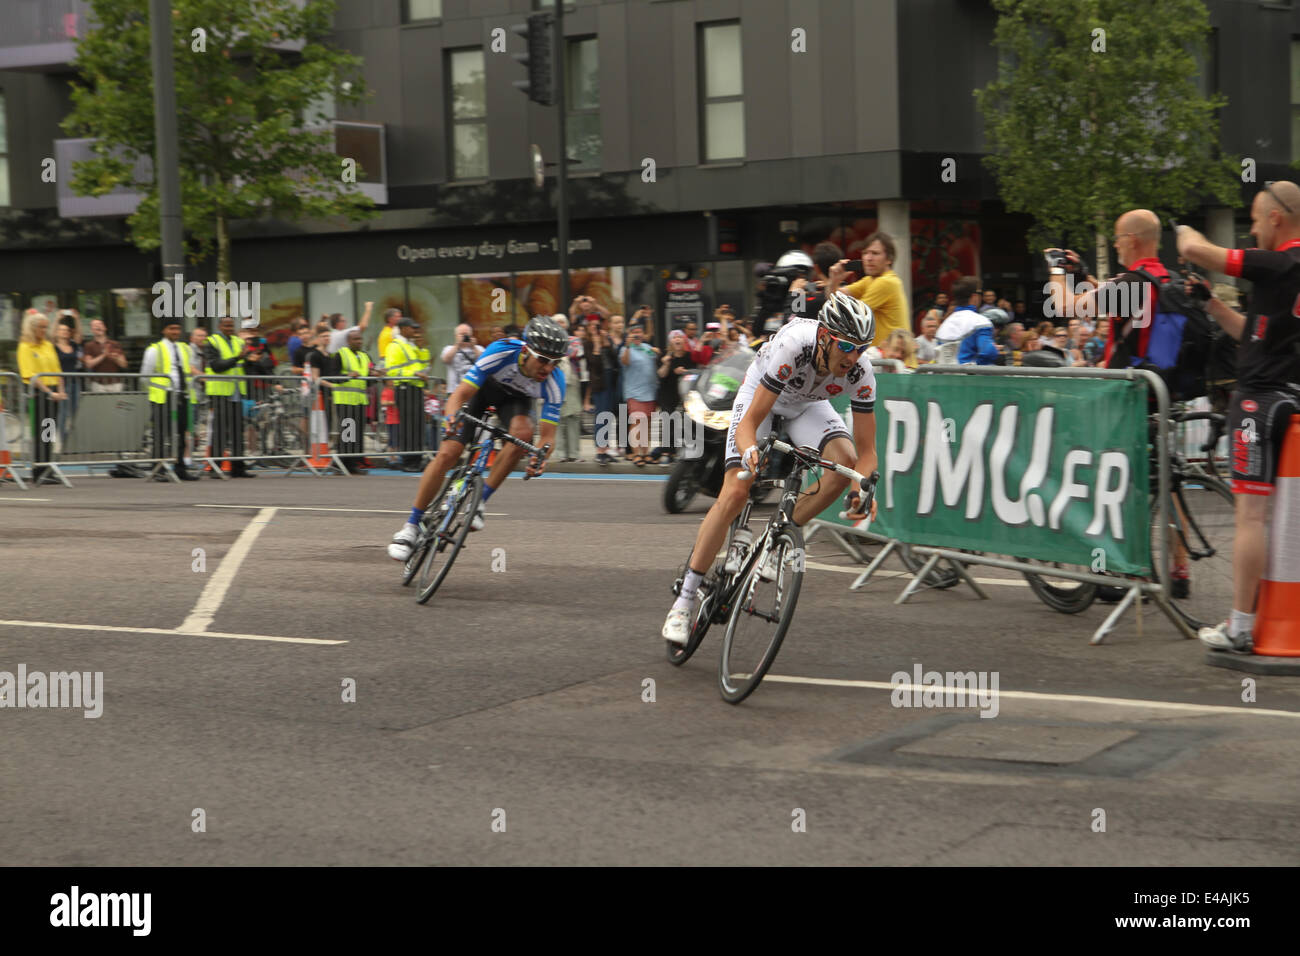 London, UK. 07th July, 2014. London, UK. 07th July, 2014. Germany's sprinter Marcel Kittel  seen in second place at Stratford High Street. Marcel went on to win  Stage 3 of the Tour de France  in London. Credit:  © david mbiyu/Alamy Live News Credit:  david mbiyu/Alamy Live News Stock Photo